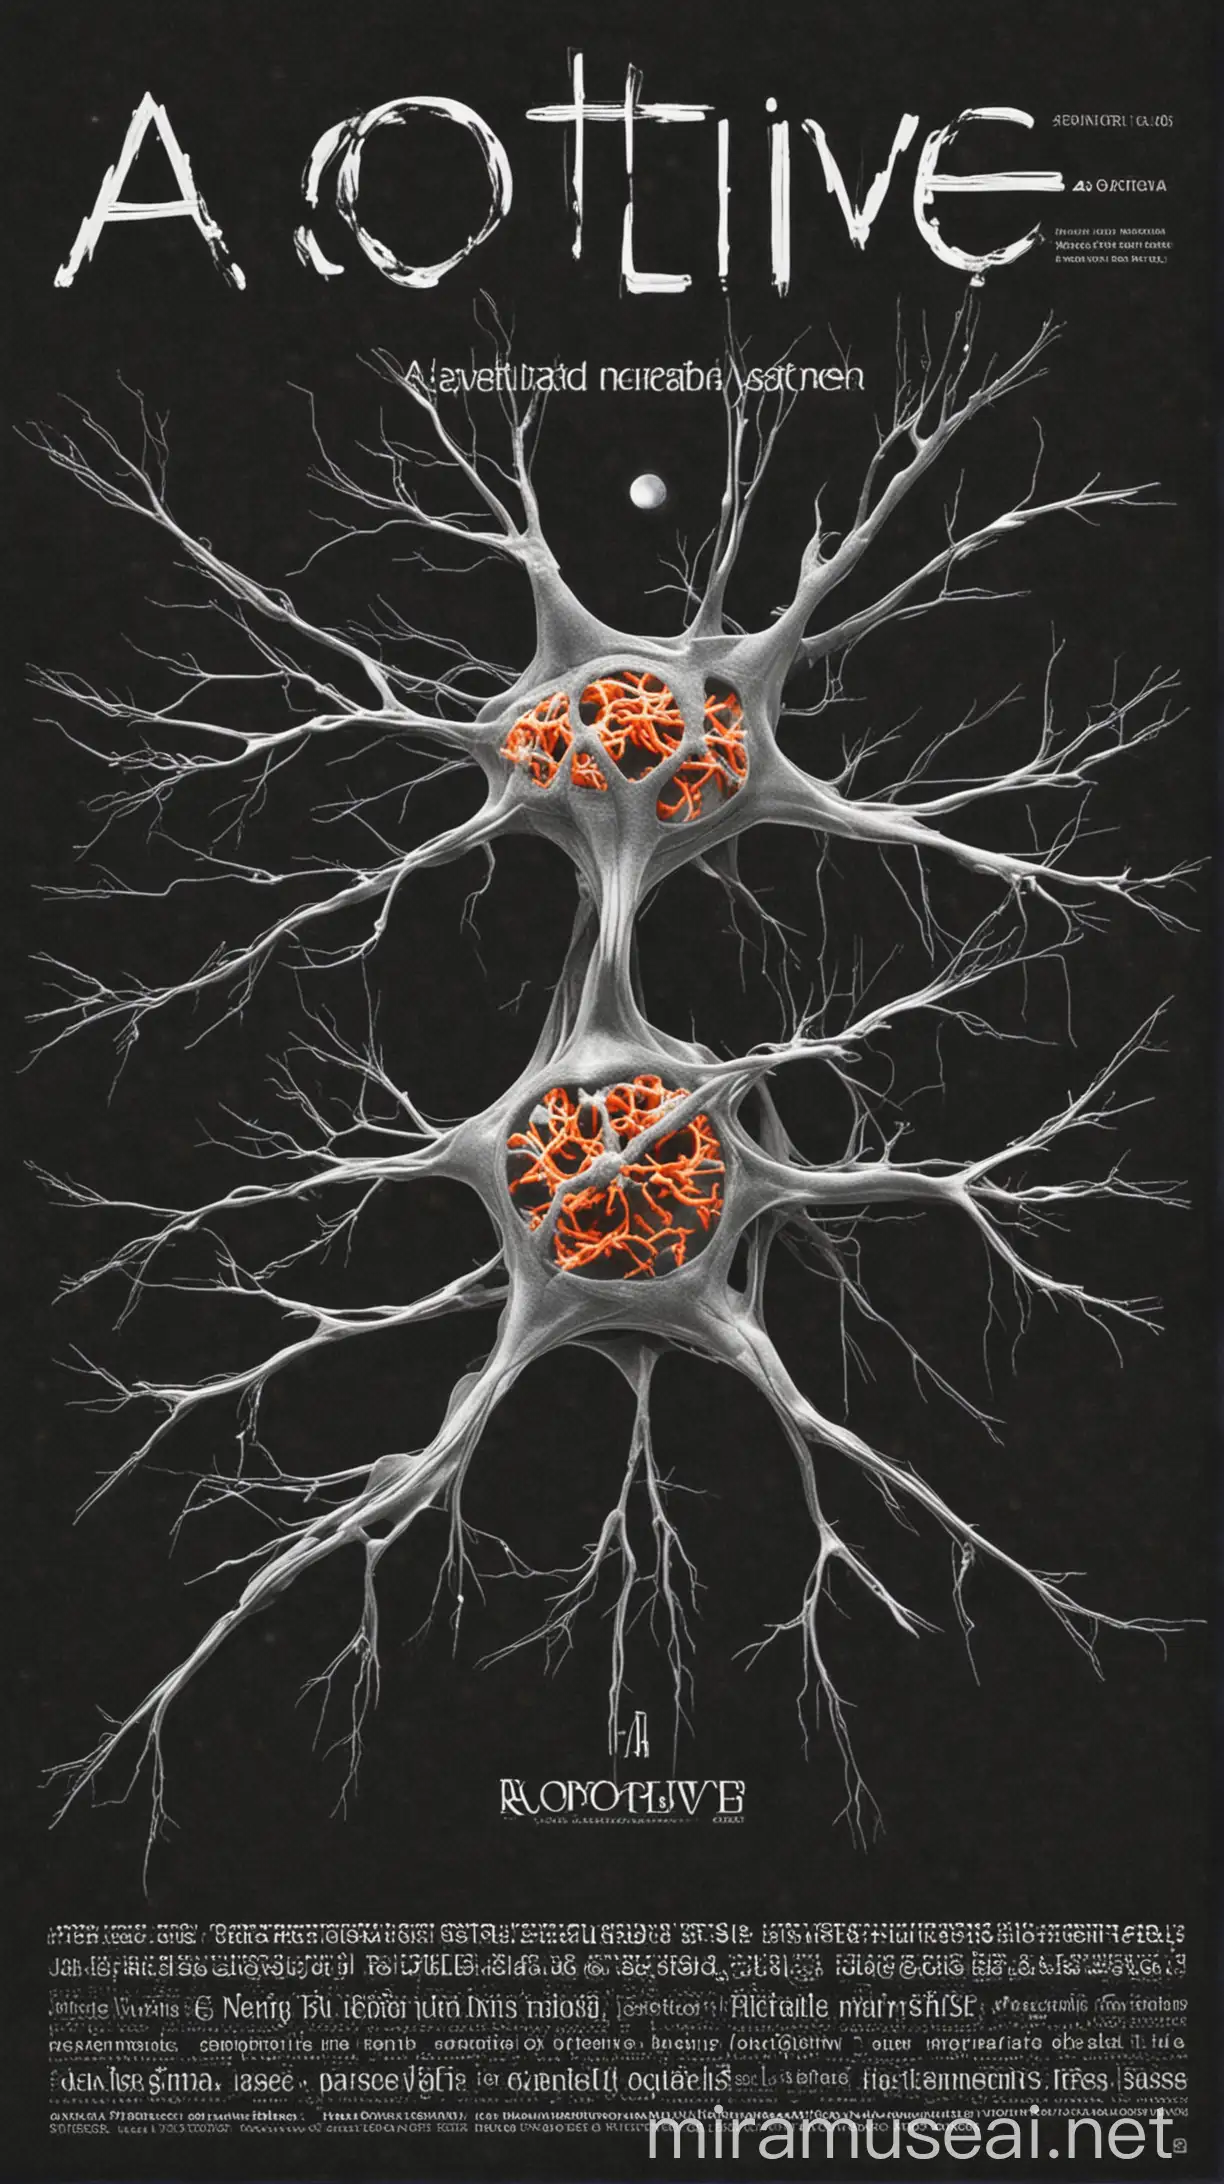 a scientific magazine about neurons, with two neuro atom connected to eachother picture in middle, "aotive" is the name of the magazine big on it, also add some small paragraphs, peofessional design